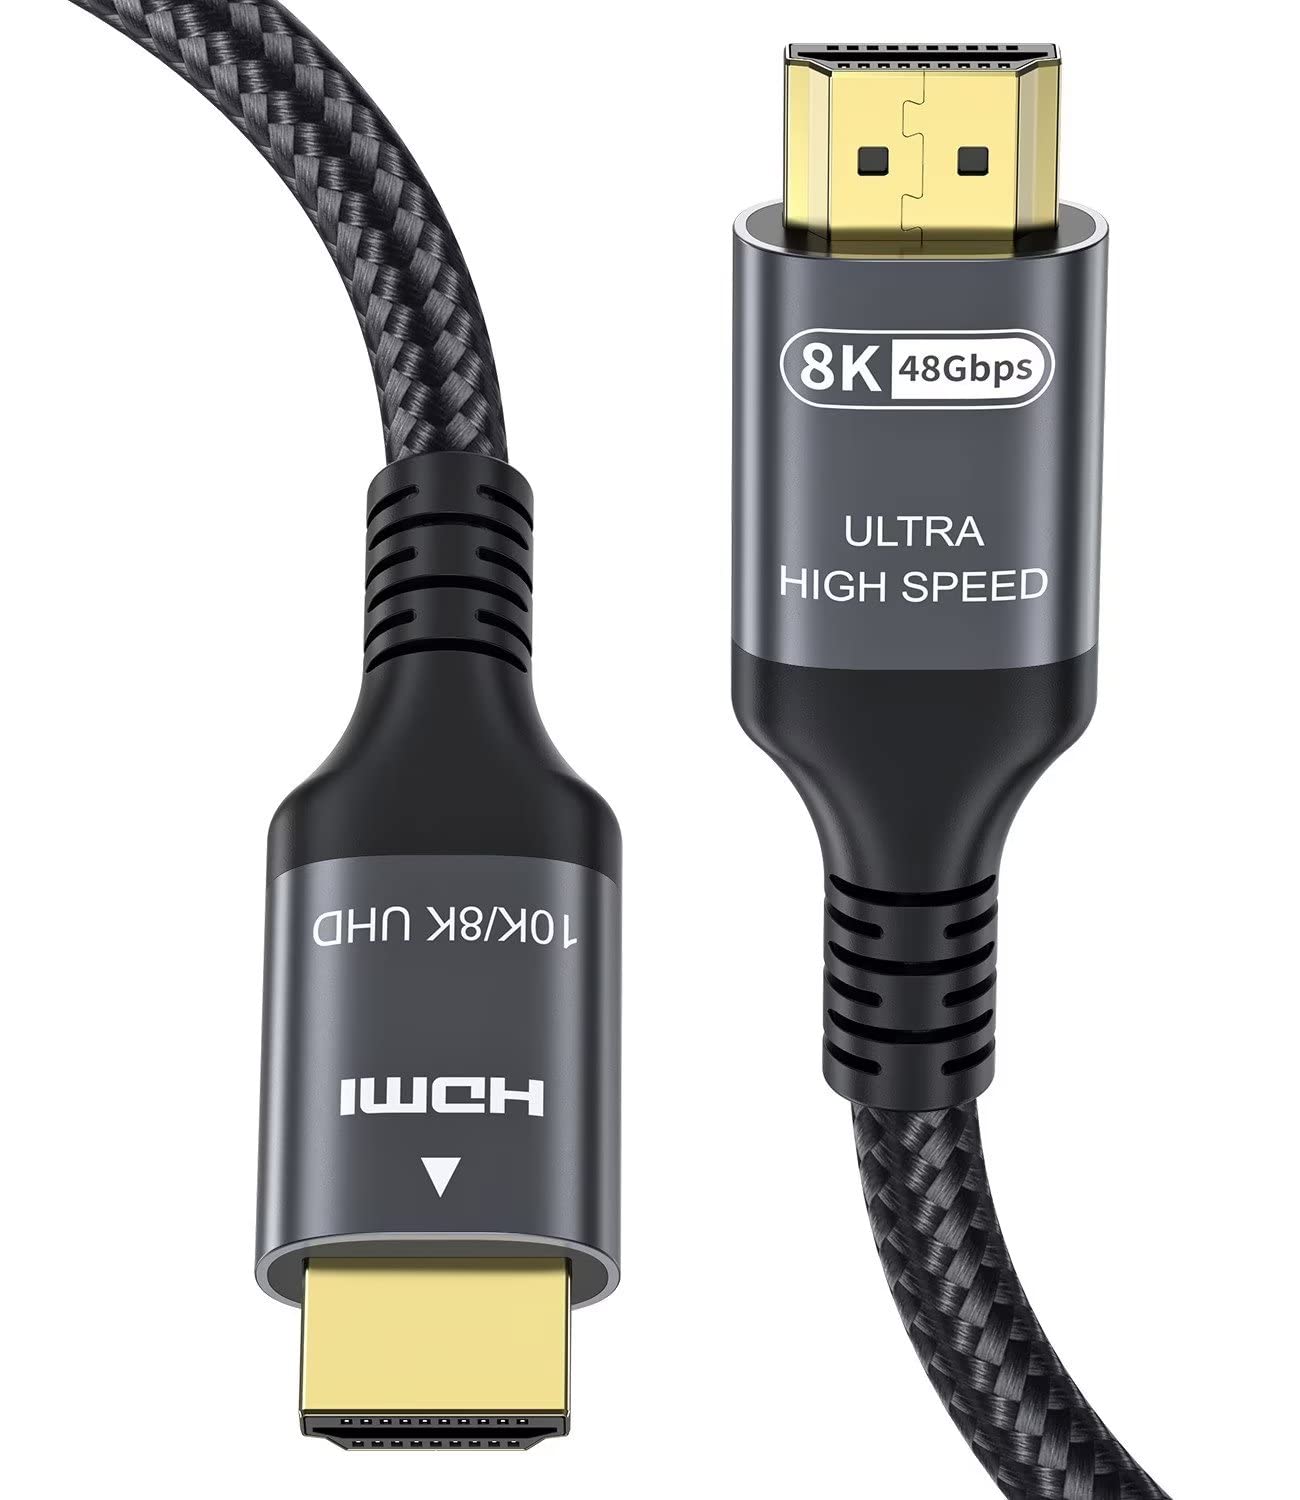 Certified 8k 48Gbps HDMI Cable 4k 120Hz 144Hz 8k 60Hz Ultra High Speed HDMI 2.1 Cable Support ARC eARC 1ms 12Bits DTS:X Dolby Atmos Dynamic HDR10 Compatible for Mac Gaming PC Apple TV+ PS5 4 Xbox (2m)